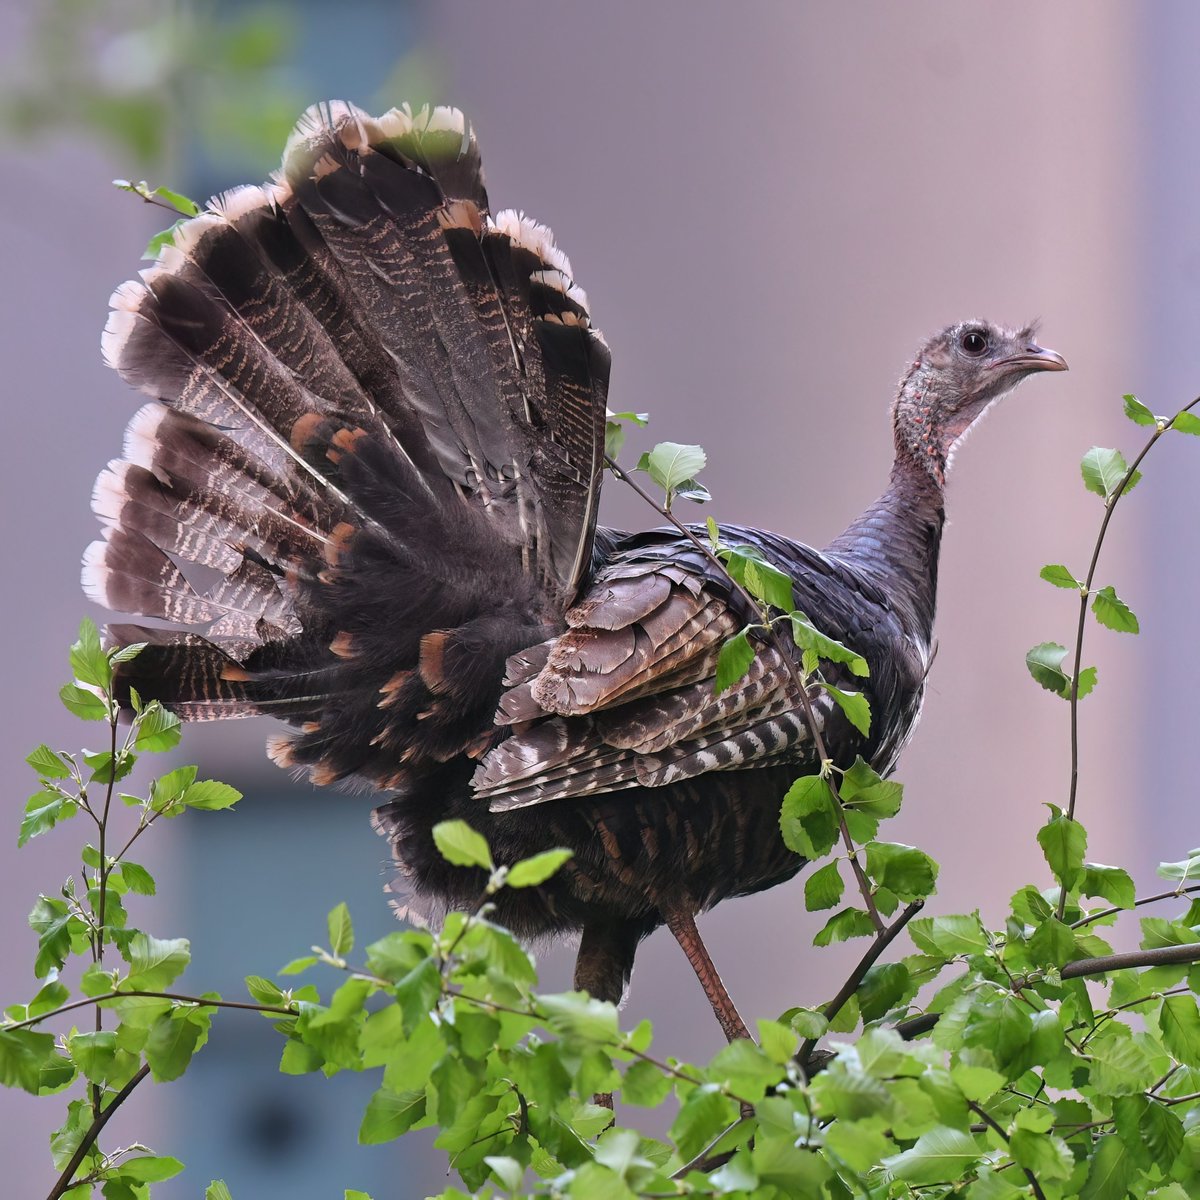 After visiting Saks Fifth Avenue, the Wild Turkey flew to a tree and wowed everyone with a tail spread on 49th Street in midtown Manhattan on Wednesday evening. 🦃